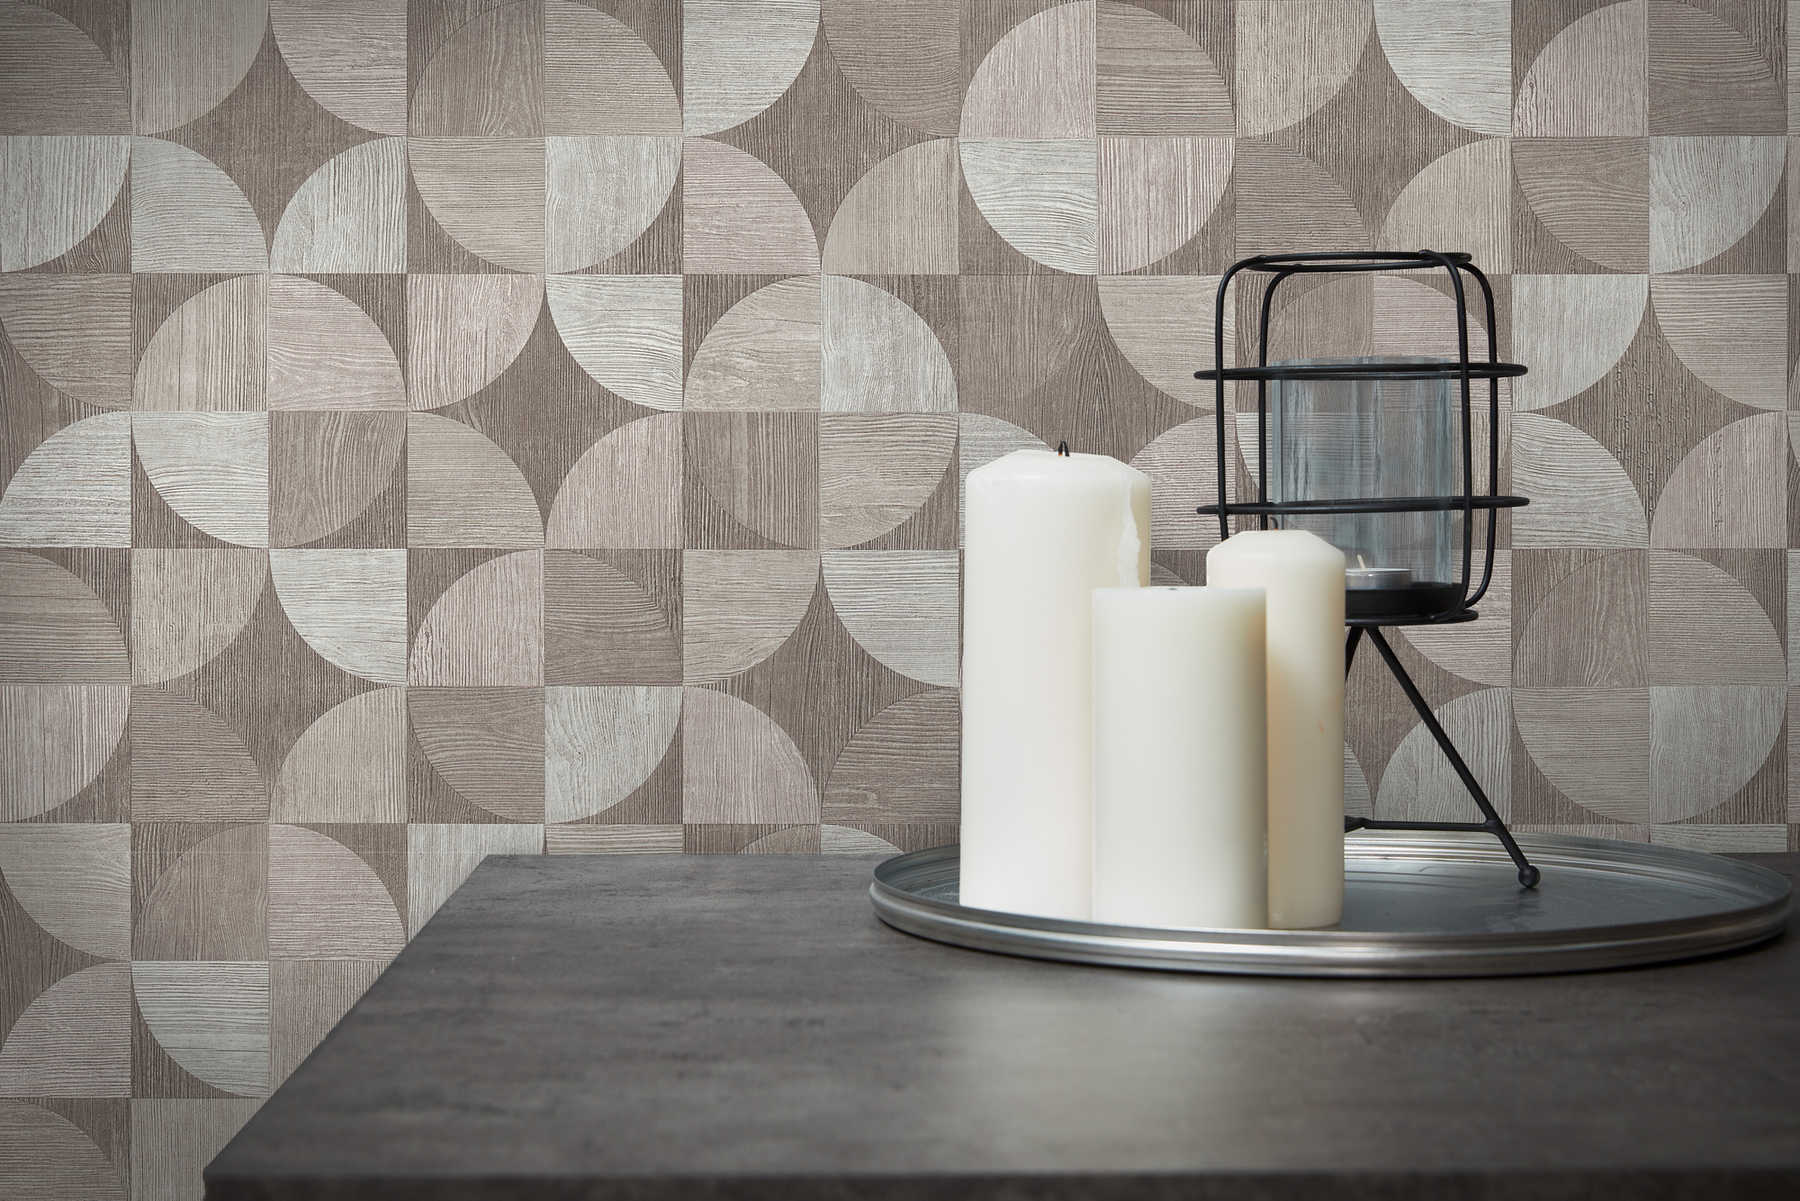             Wallpaper with graphic pattern in wood look - grey
        